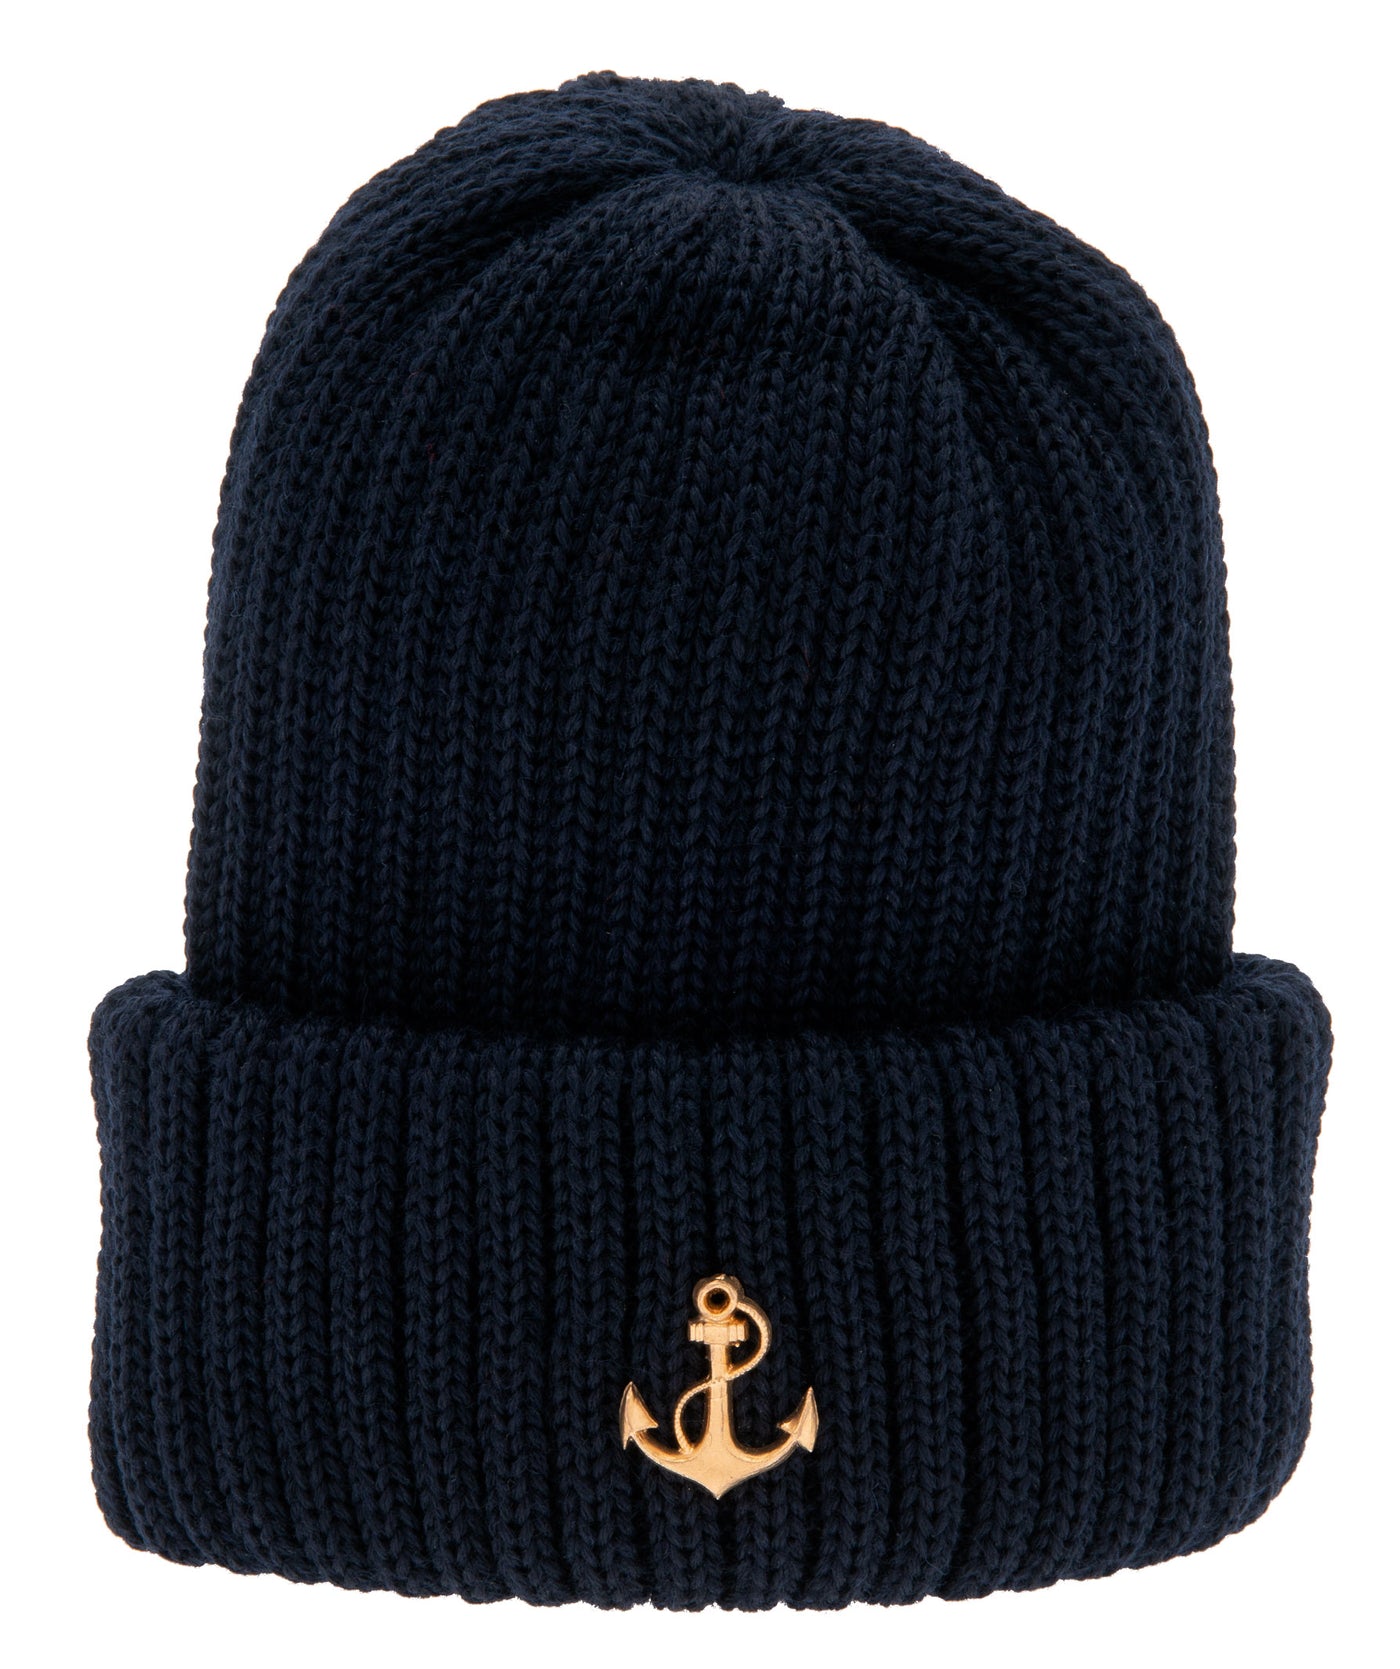 Nelson Wool Knit - Navy Anchor